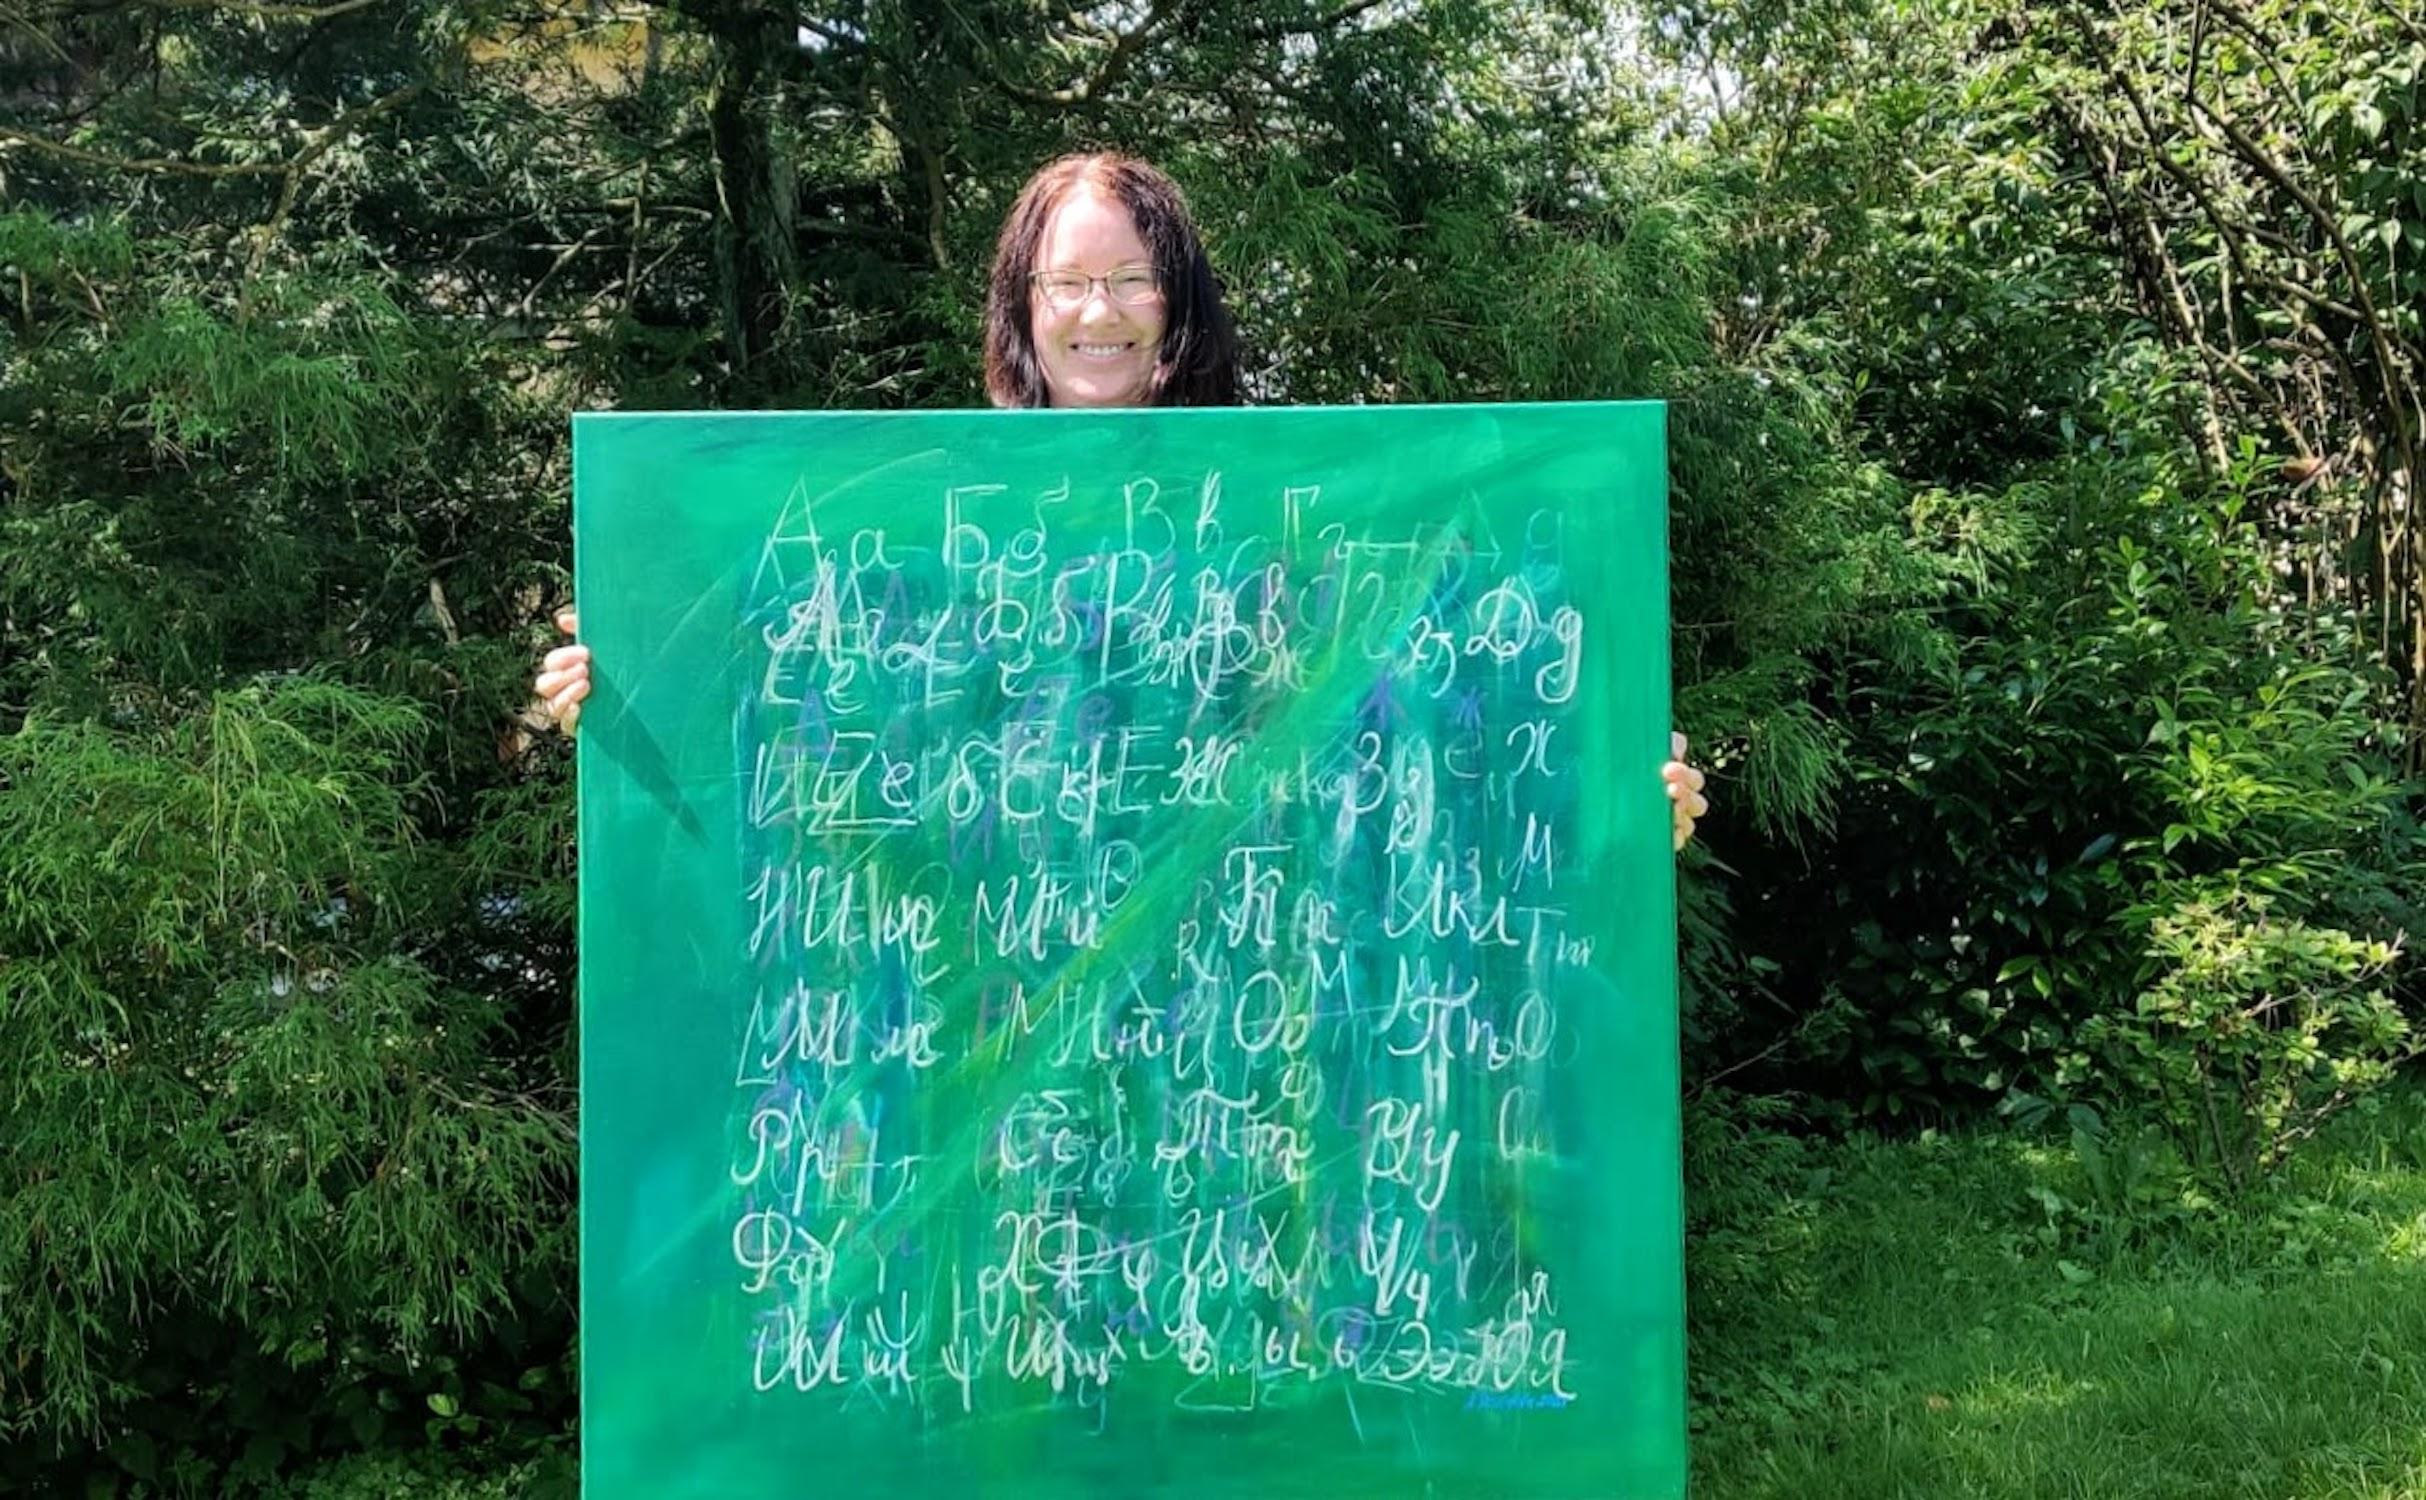 Abstract painting made in a style of an old green schoolboard with alphabets.
I use different languages to decorate the artwork: Cyrillic letters, Greek and German letters.
All layers of the painting are covered with UV protective spray.
The